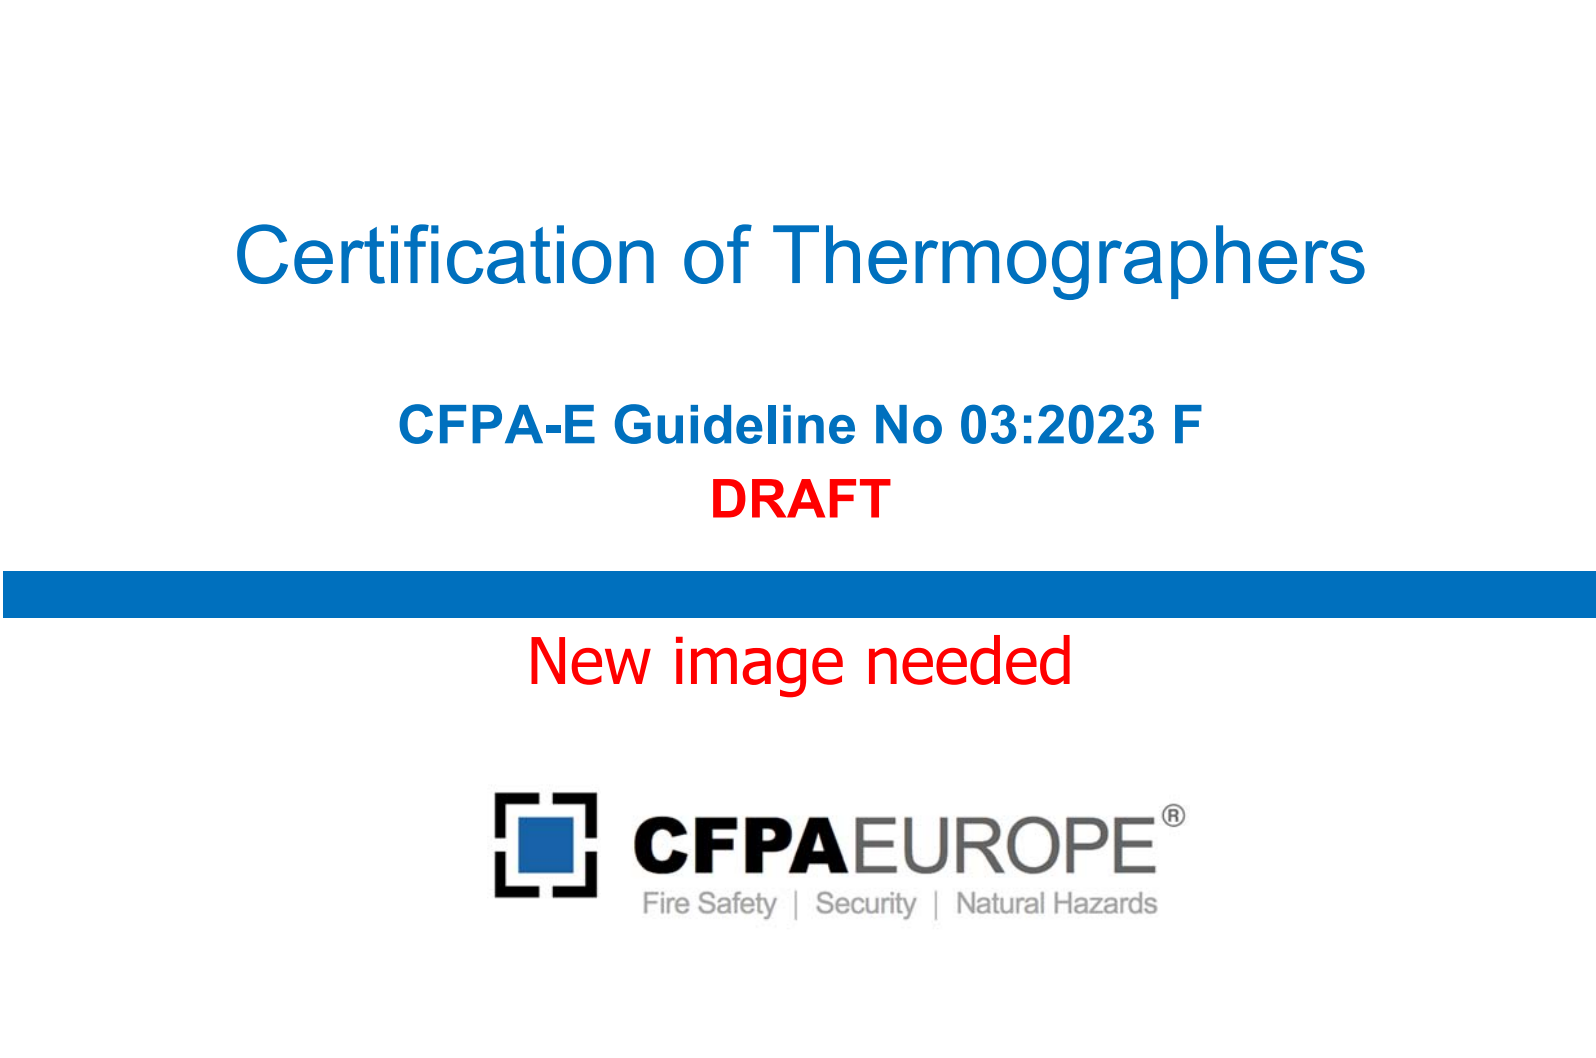 CERTIFICATION OF THERMOGRAPHERS – Revised guideline for HEARING